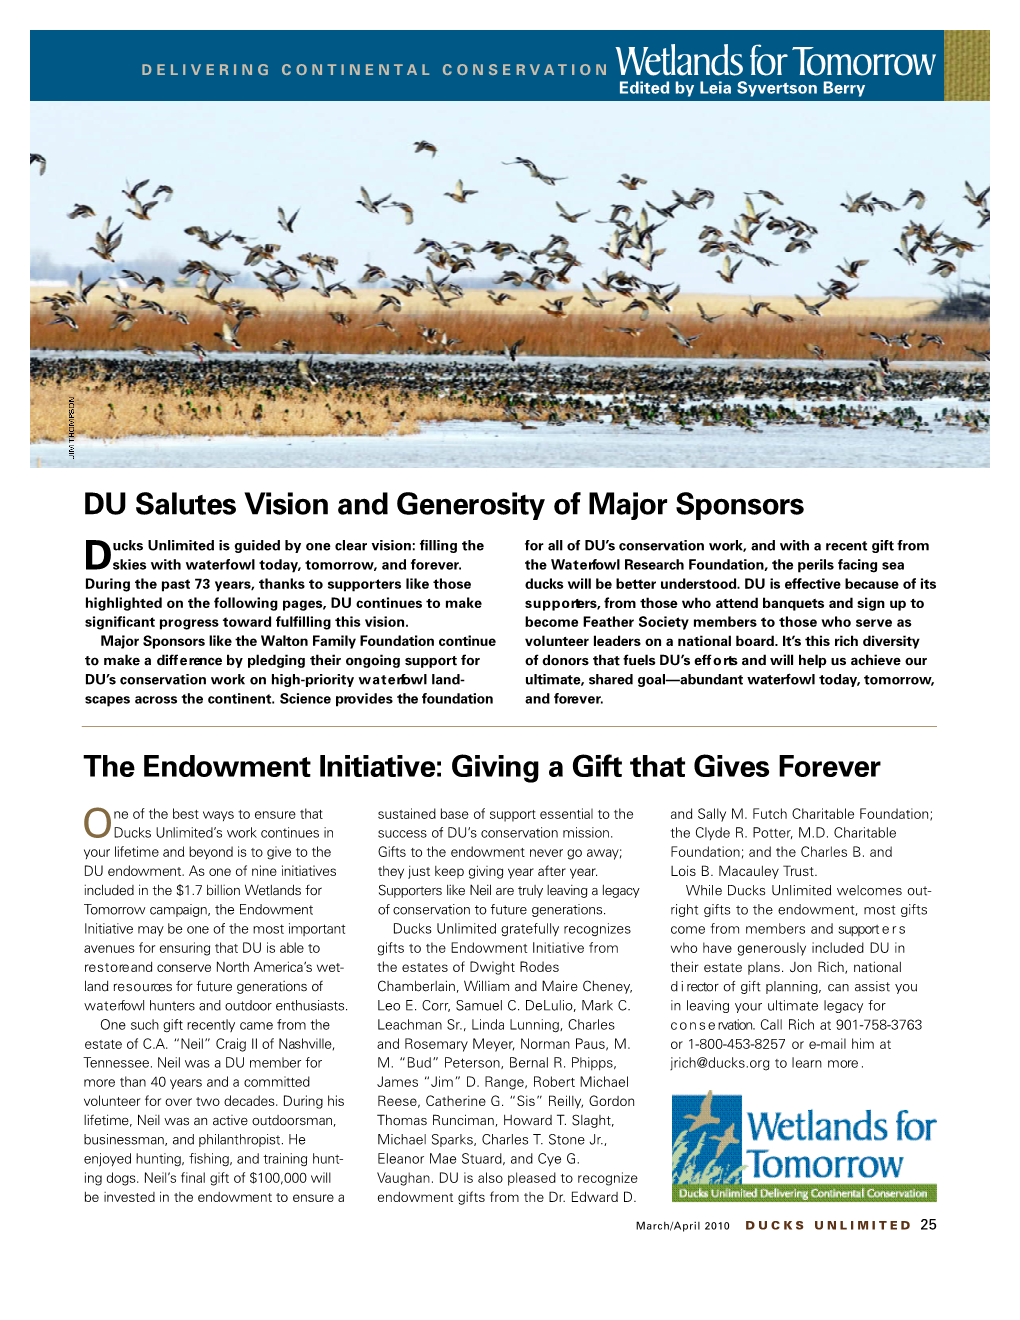 The Endowment Initiative: Giving a Gift That Gives Forever DU Salutes